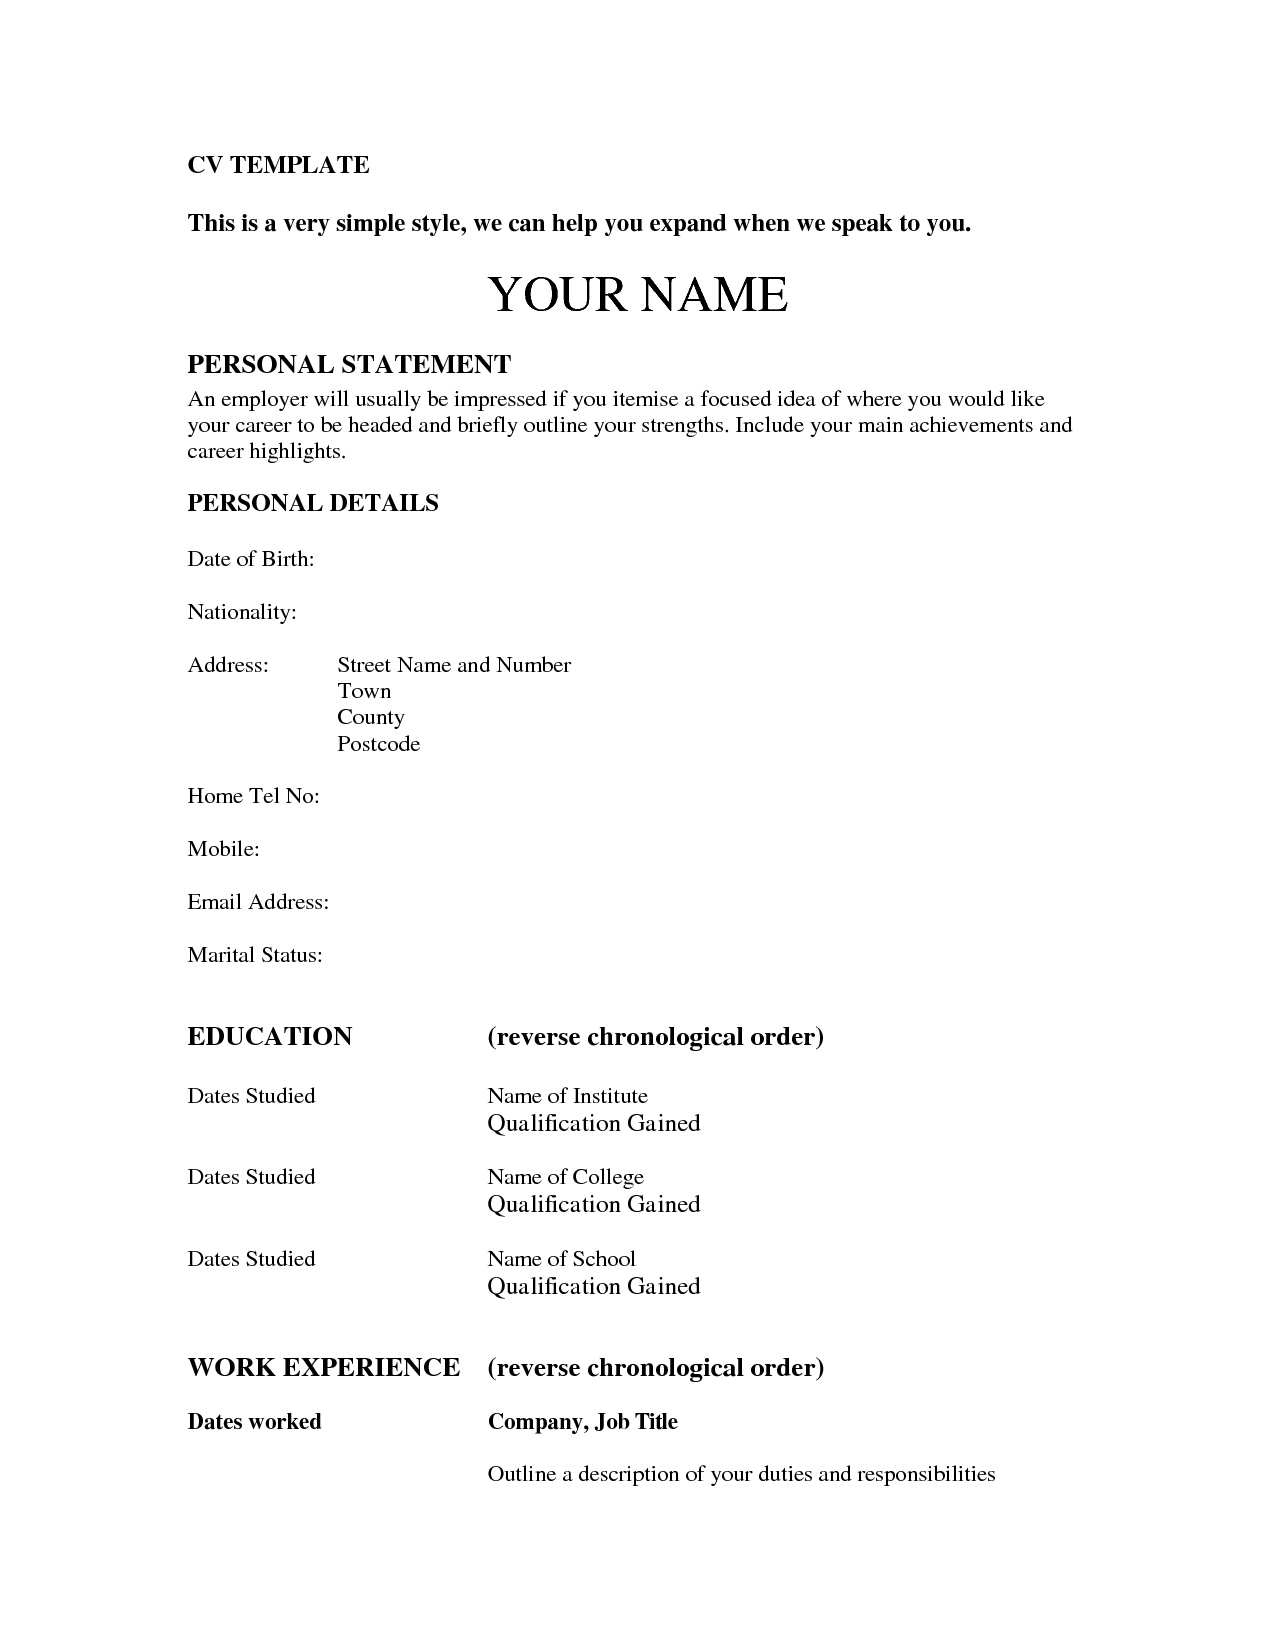 Resume Examples For Jobs Cv Template Easy Simple Job Resume Examples Simple Job Resume Examples resume examples for jobs|wikiresume.com